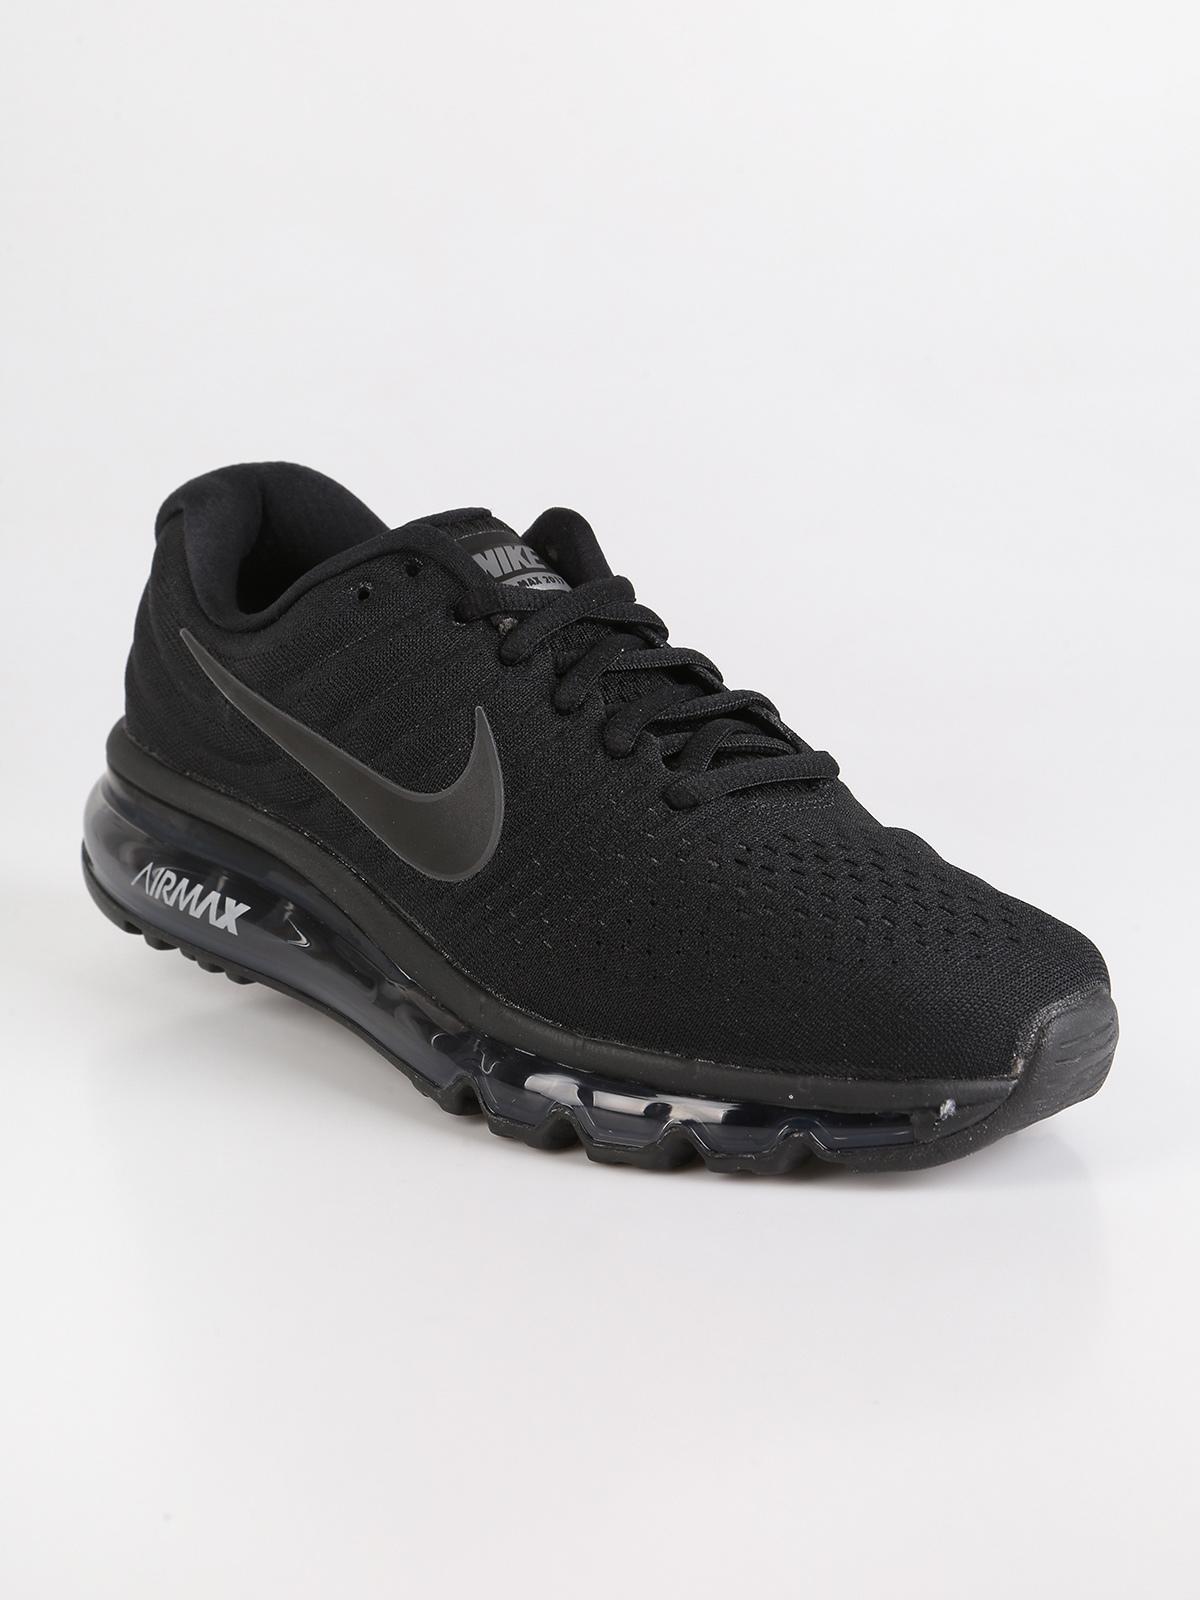 Nike Air Max 2017 (GS) - Sneakers sportive nere donna: Sneakers Basse